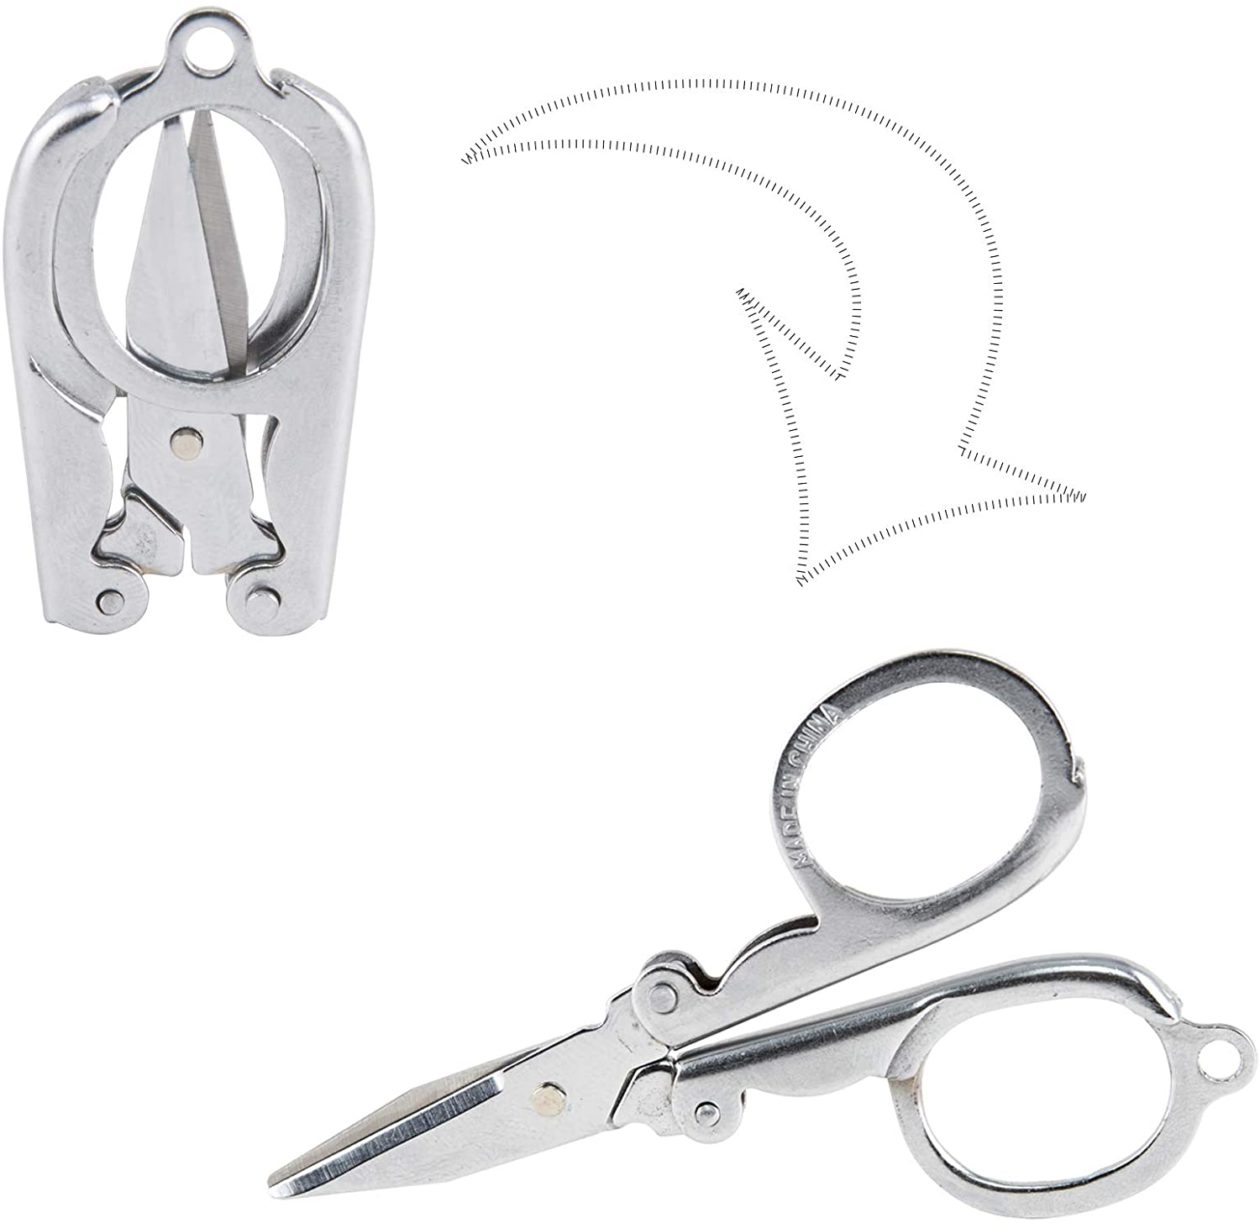 Small Folding Scissors - Foldable Sewing Scissors, Surgical Mart